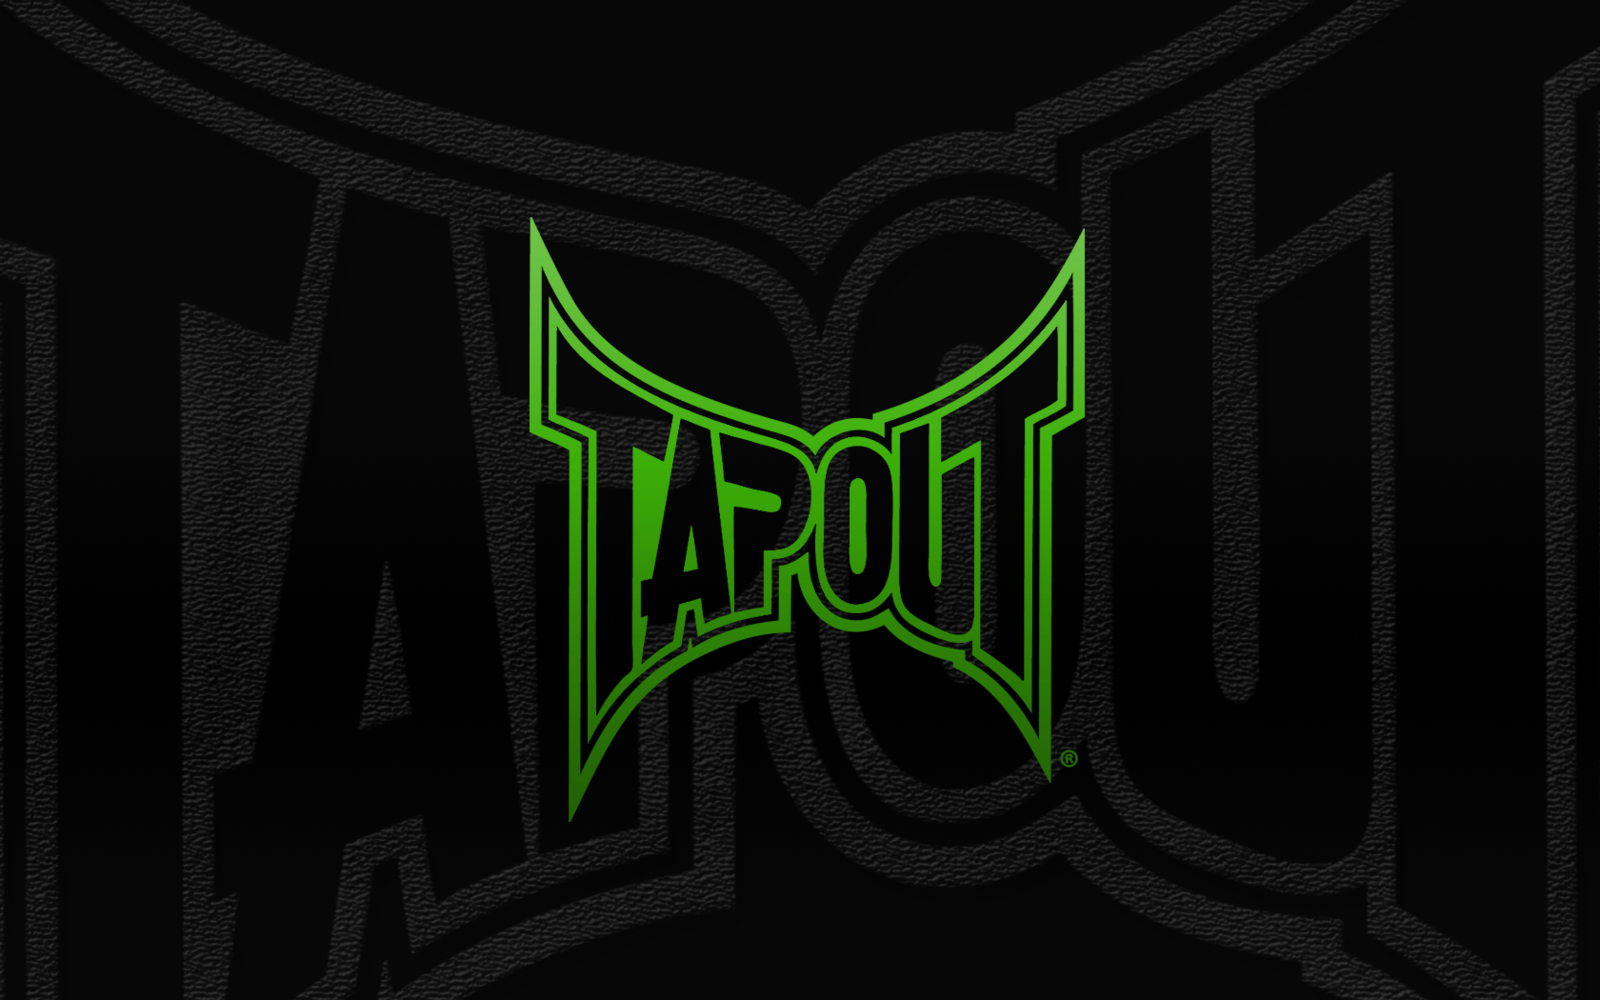 Green Tapout Backgrounds Images amp Pictures   Becuo